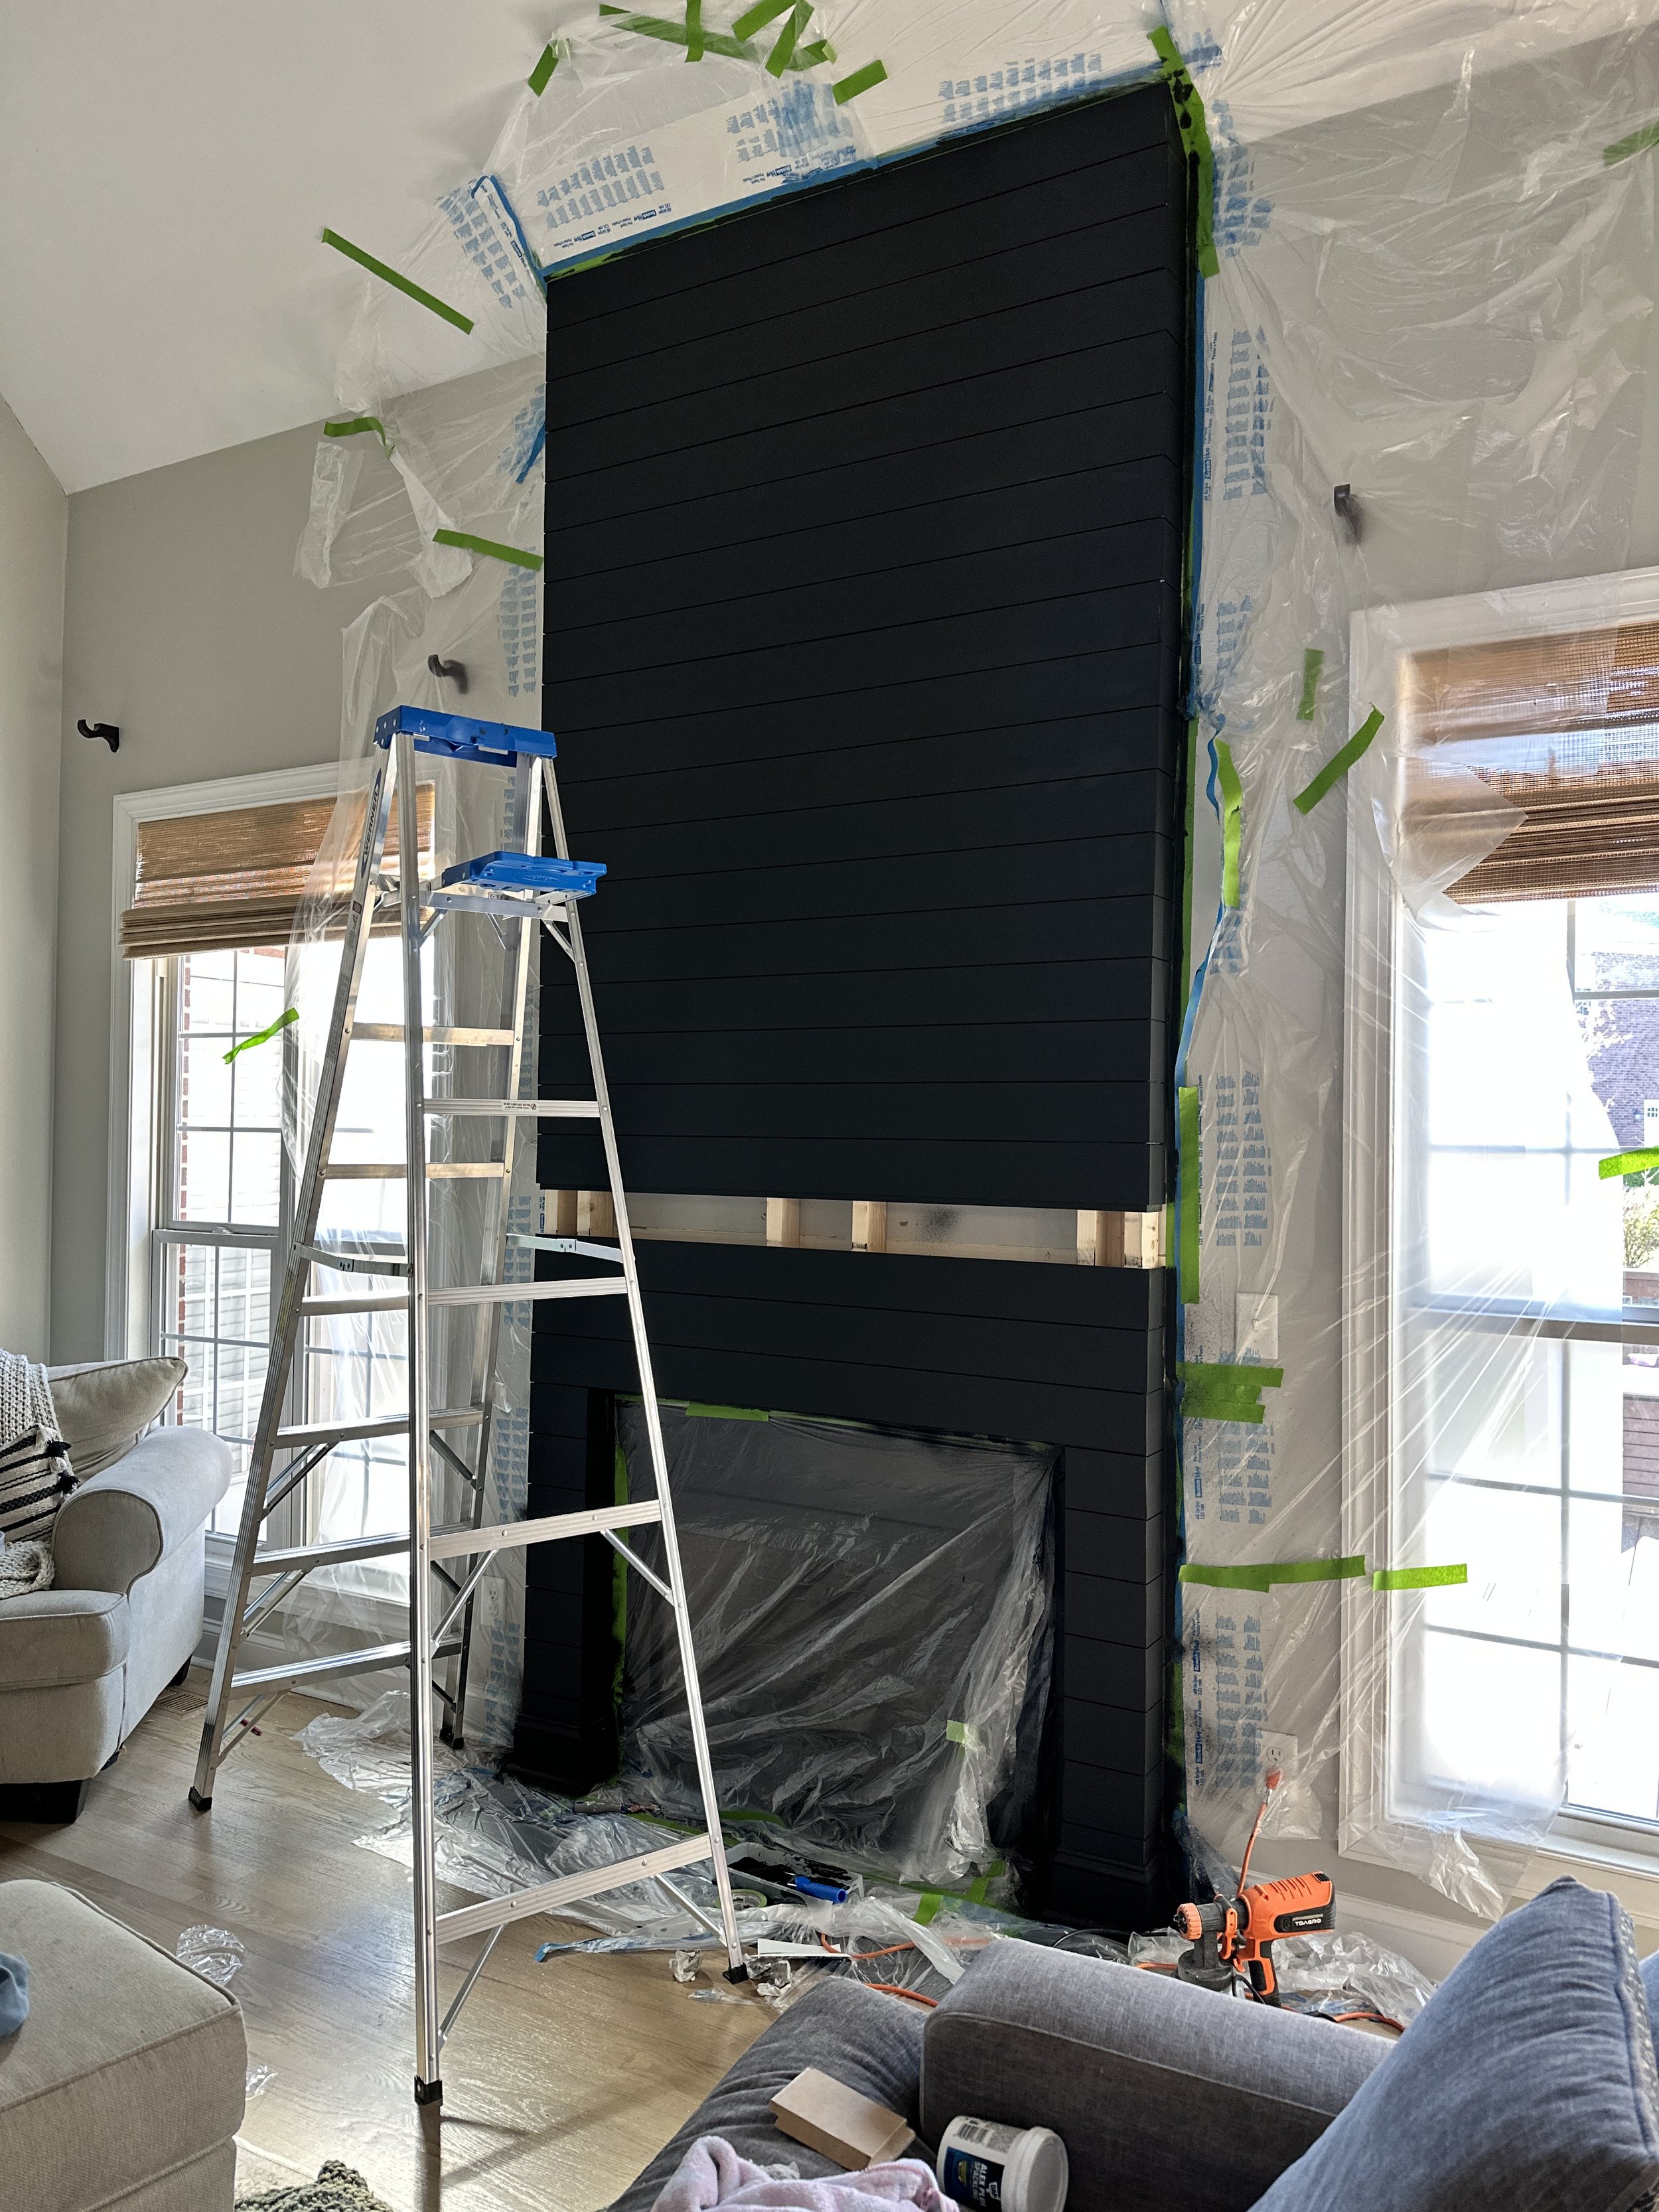 painting the fireplace black